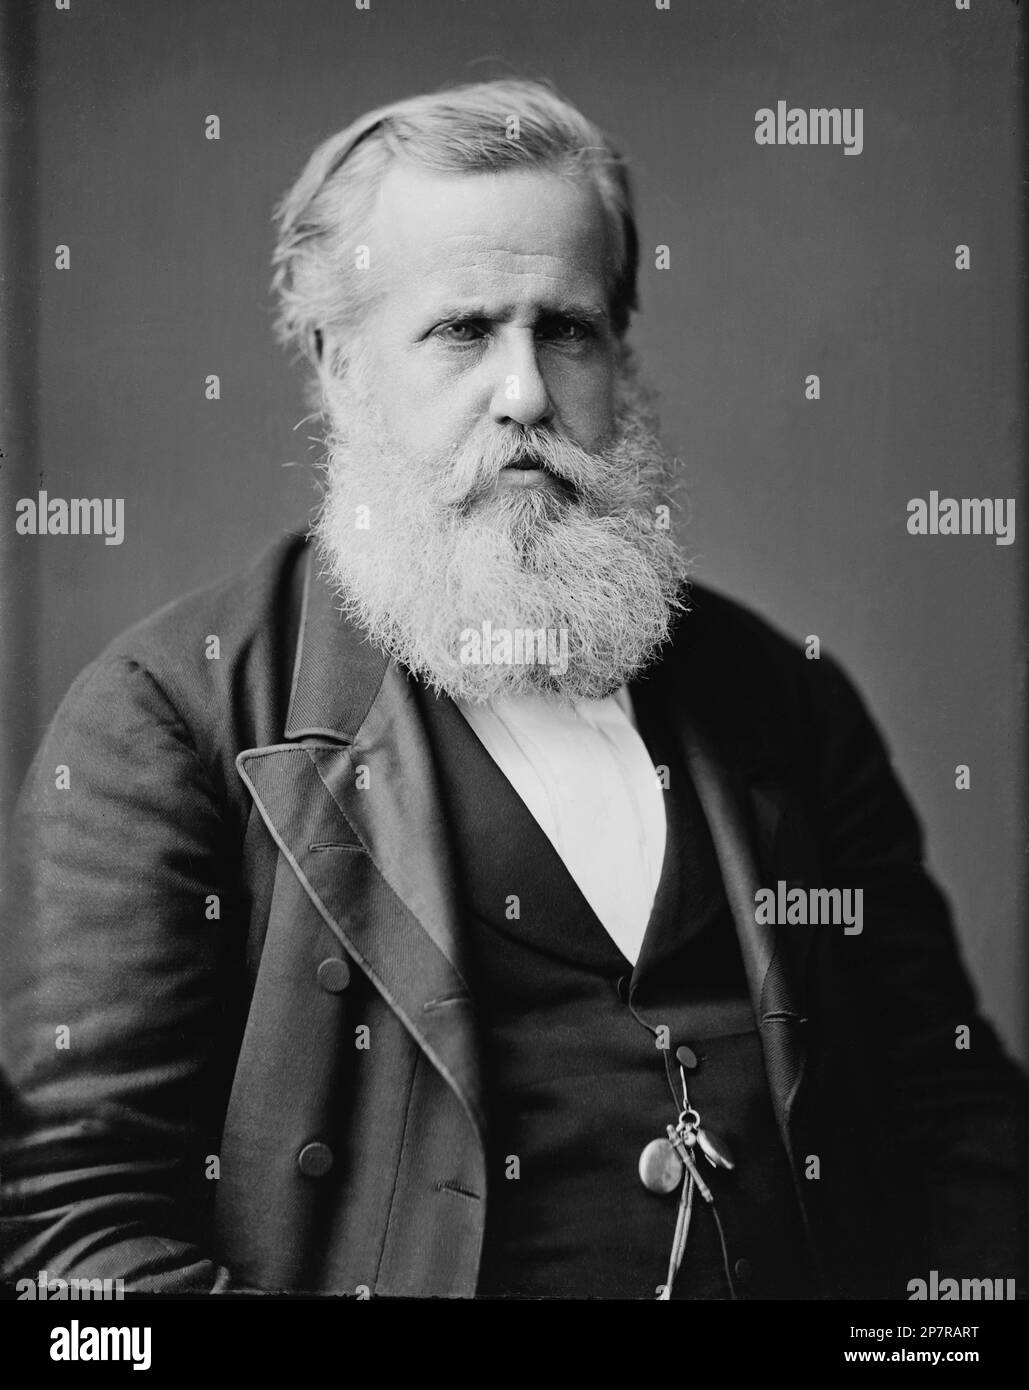 1876 ca. : The Emperor of Brazil Dom PEDRO II  ( 1824 - 1891 )  , was the second and last Brazilian Emperor . Dom Pedro II was married on September 4, 1842 to Princess Teresa of the Two Sicilies  BOURBON ( 1822 – 1889 ), the youngest daughter of King Francis I of the Two Sicilies ( 1777 – 1830 ) and Maria Isabella of Spain . They had four children - CASA de BRAGANCA e Habsburgo . Photo by  Mathew Brady , USA - PORTOGALLO  - Borbone - ASBURGO - ABSBURG - Habsburg - REALI - NOBILTA'   - NOBILITY - ROYALTY - HISTORY - FOTO STORICHE - BELLE EPOQUE  - BRASILE - Imperatore   - BELLE EPOQUE  - Bragan Stock Photo